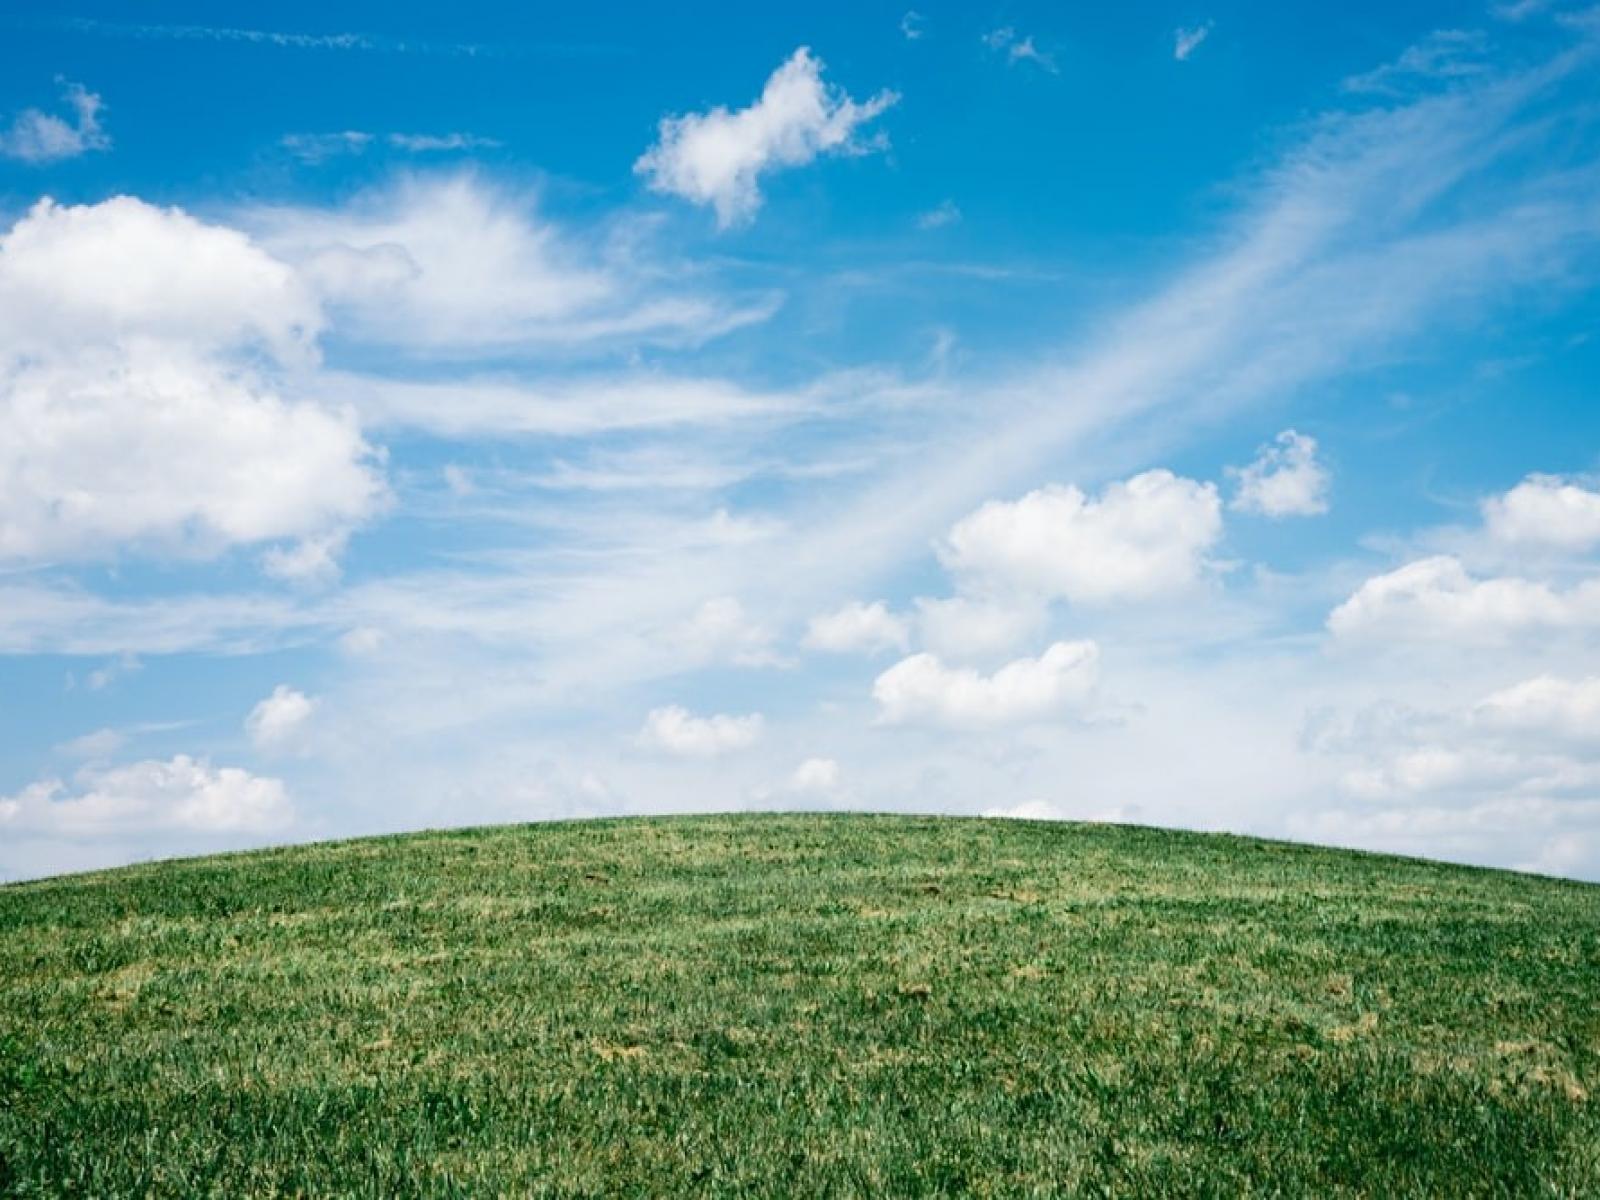 Clouds on a bright blue sky above a grassy hill